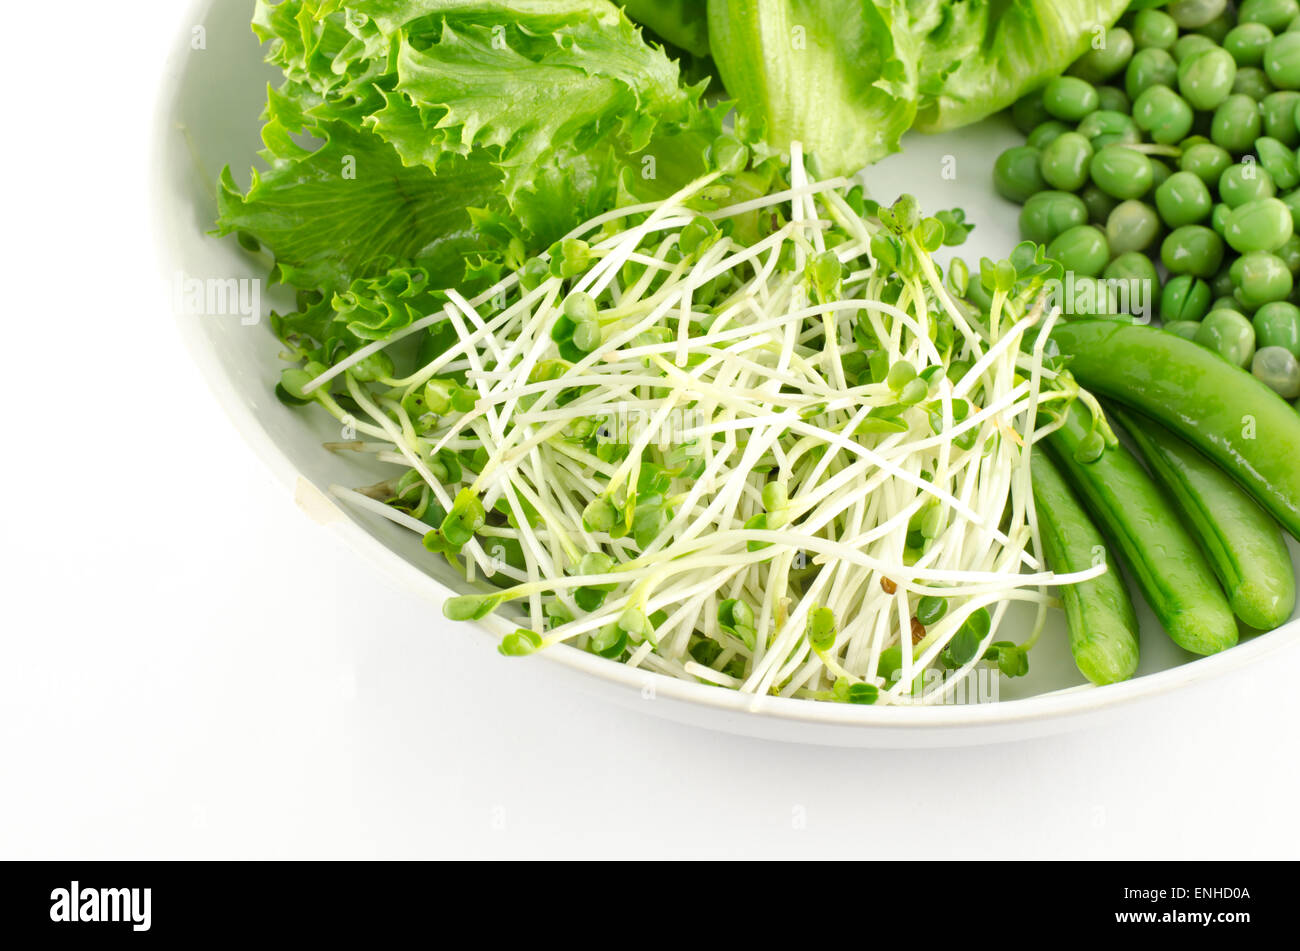 healthy food green vegetable isolated on white background Stock Photo